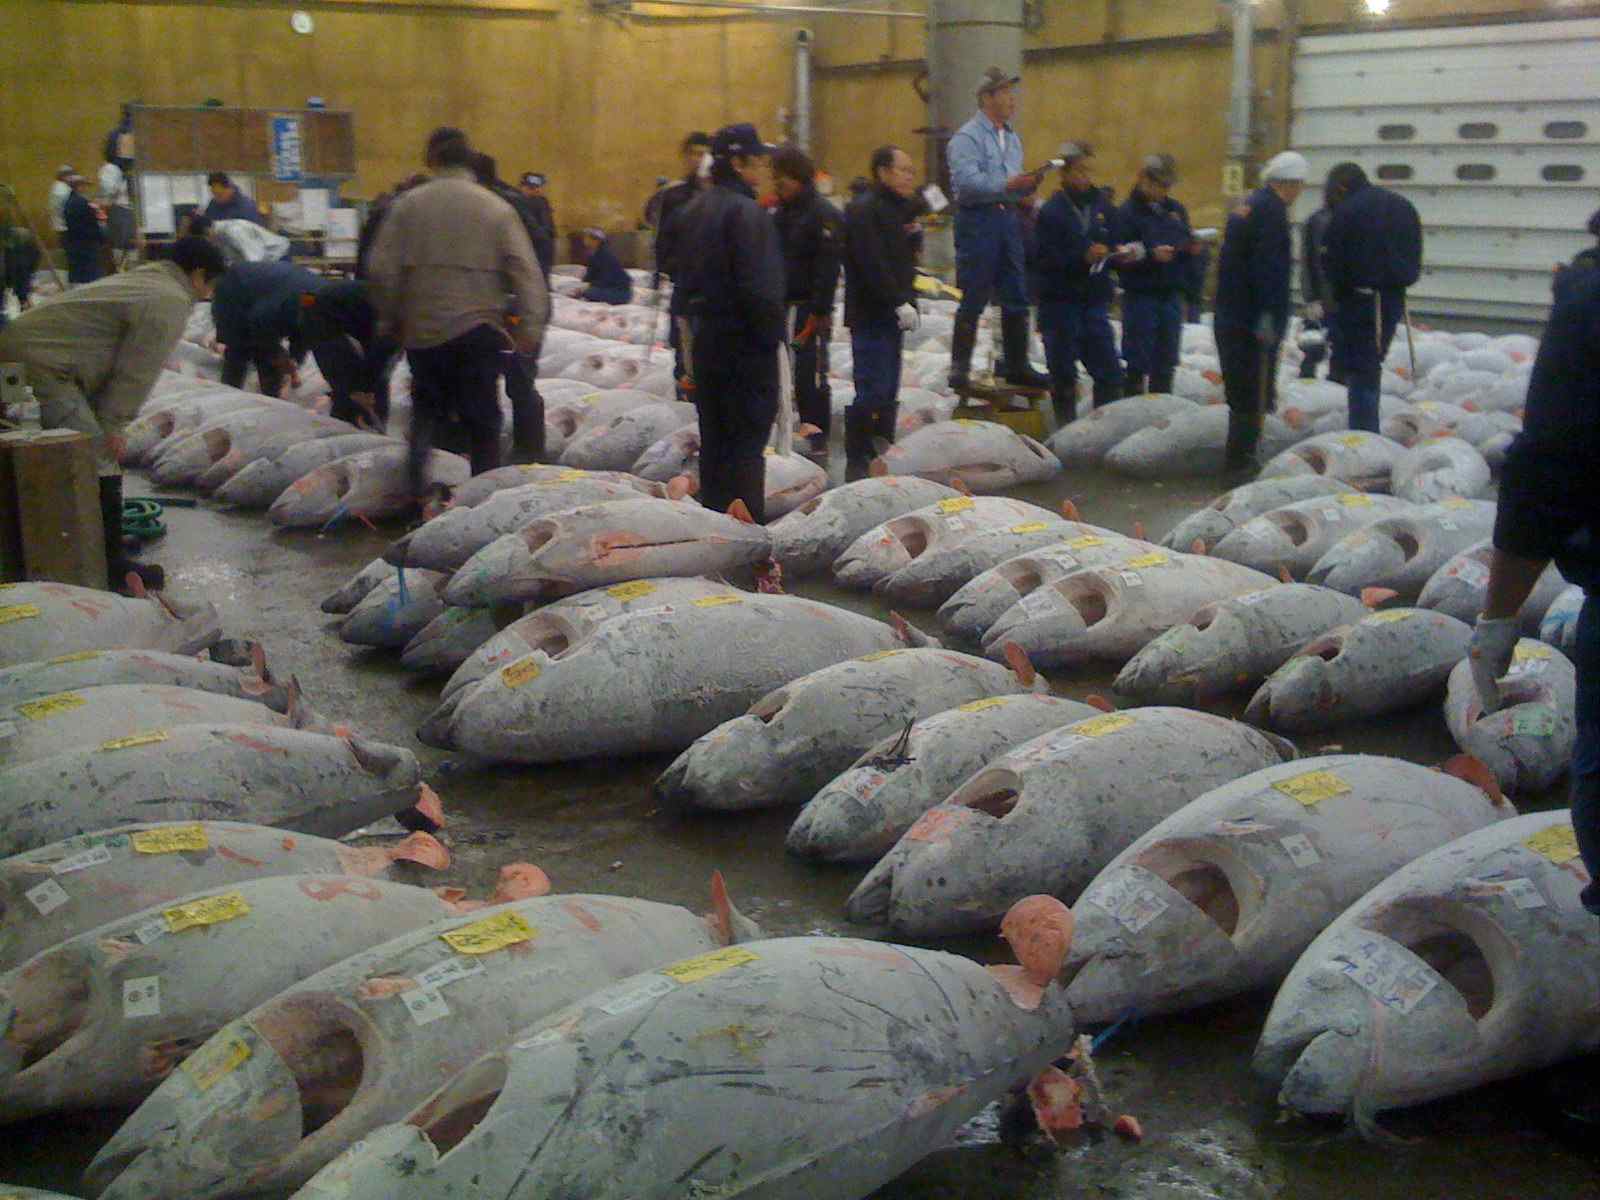 Hundreds of large fish laid out on the floor with men walking around with clipboards.